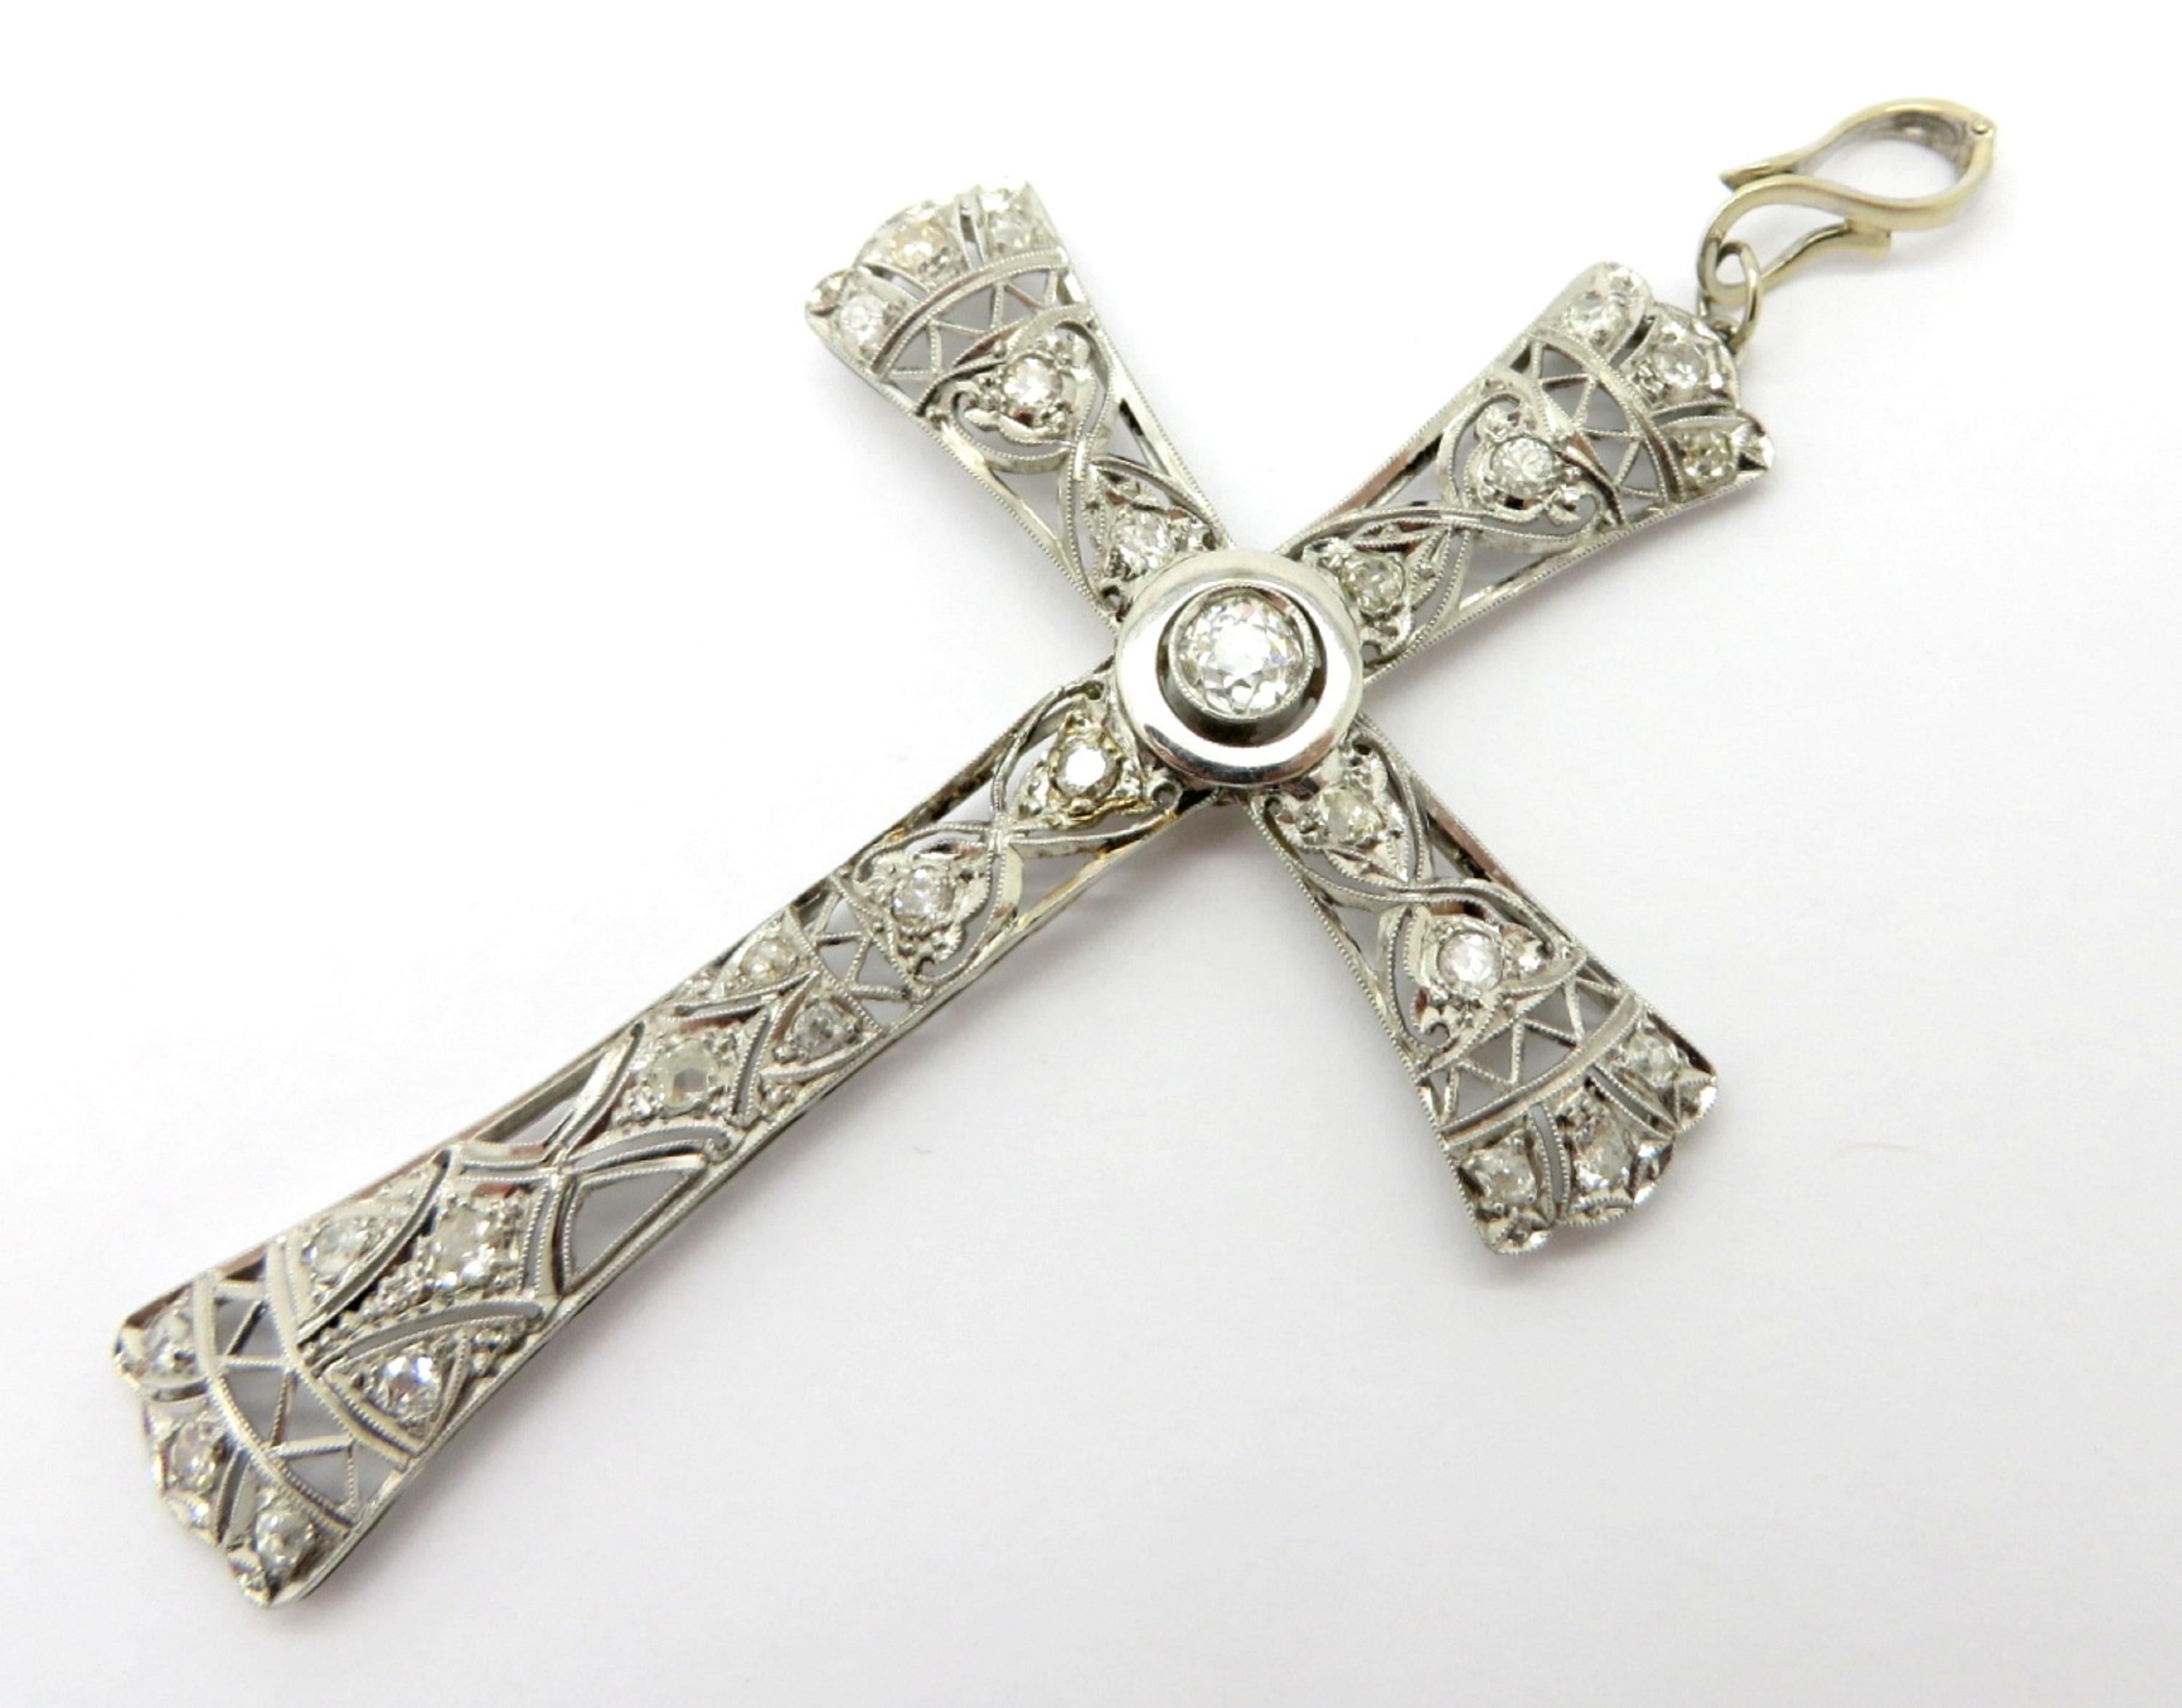 For sale is a beautiful large Art Deco Platinum Diamond Cross pendant!
Showcasing one (1) Old European Cut diamond in the center, measuring 4.67 – 4.79 x 3.26 mm, weighing approximately 0.45 carats. Diamond Grading: Color Grade: I. Clarity Grade: